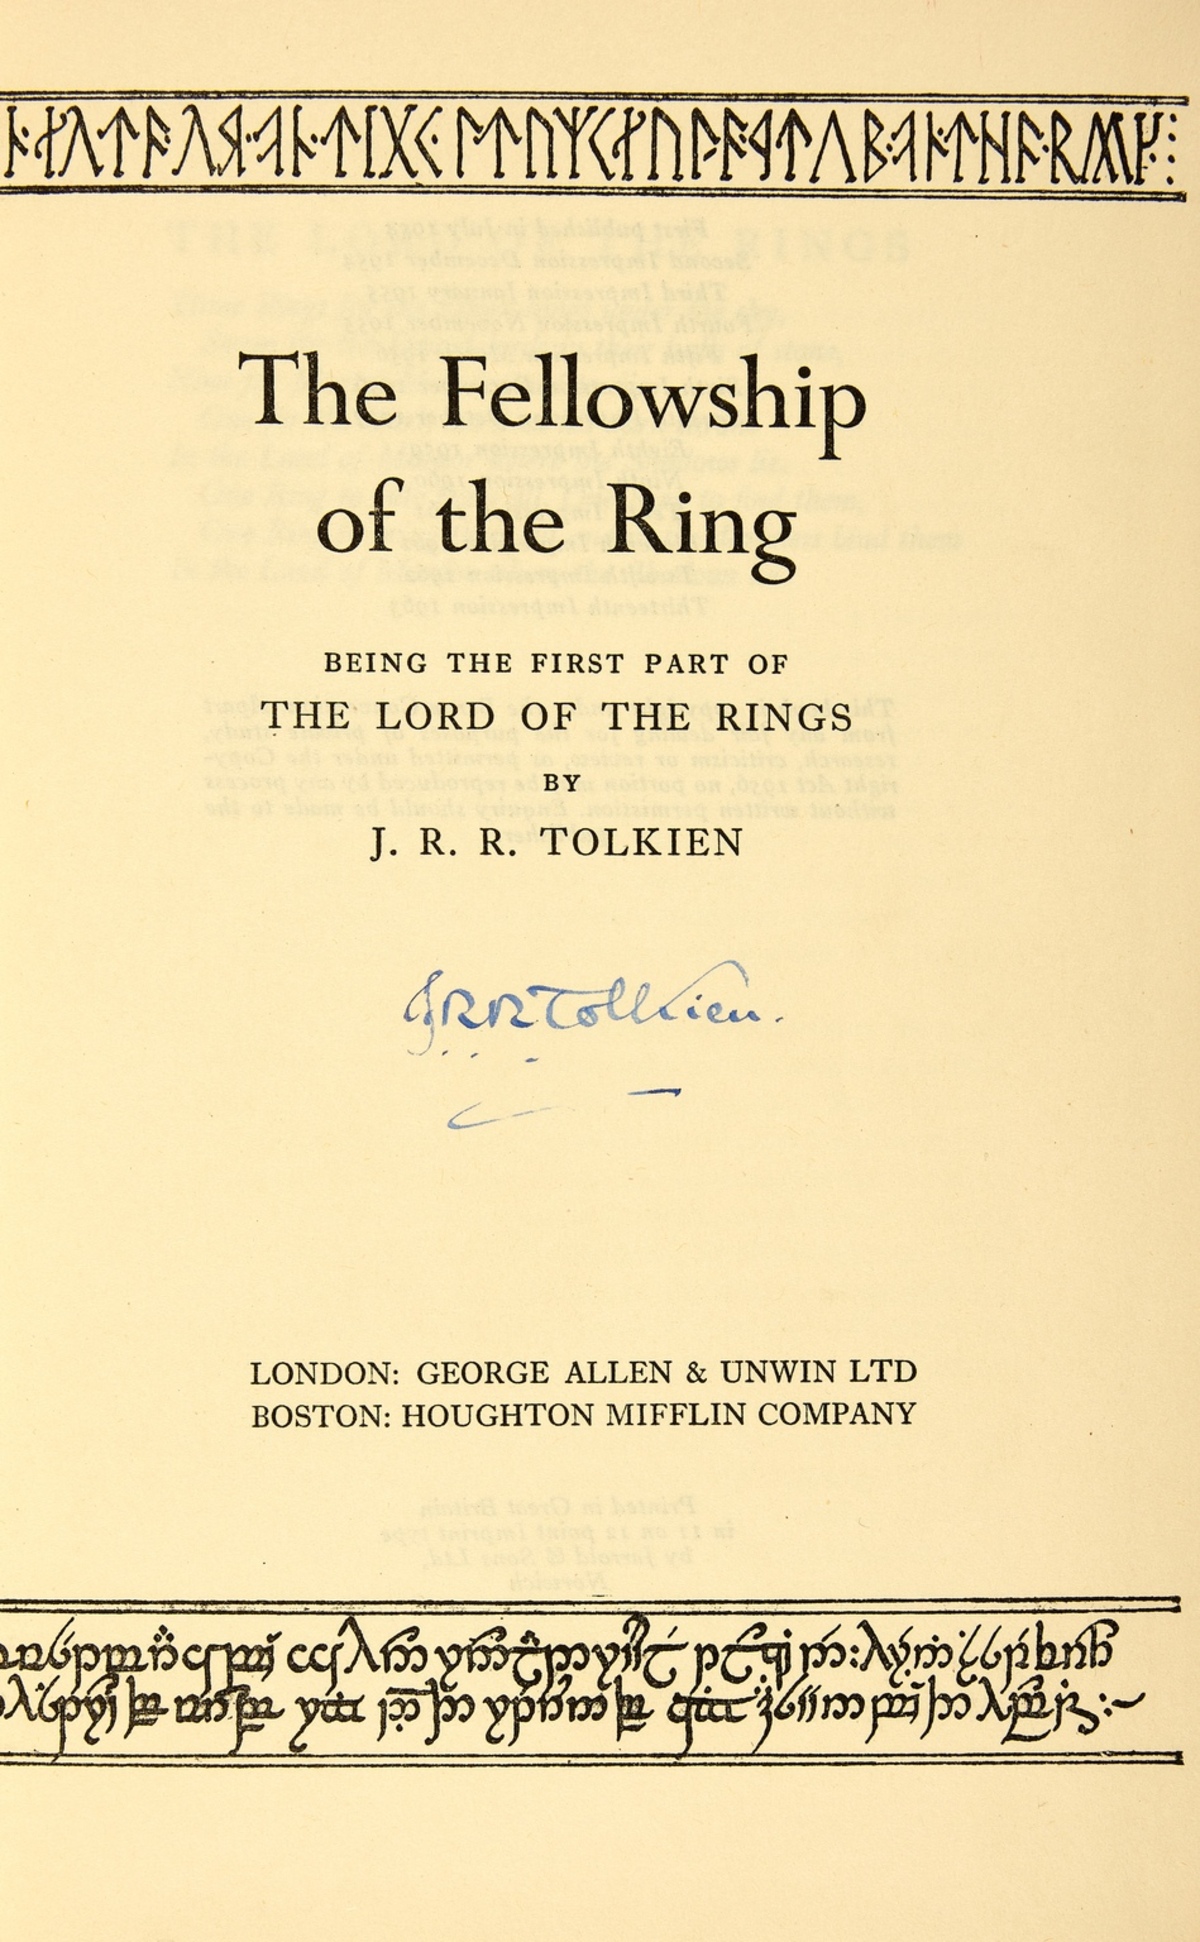 Tolkien (J.R.R.) The Lord of the Rings, 3 vol., tenth and thirteenth impressions, each signed by …